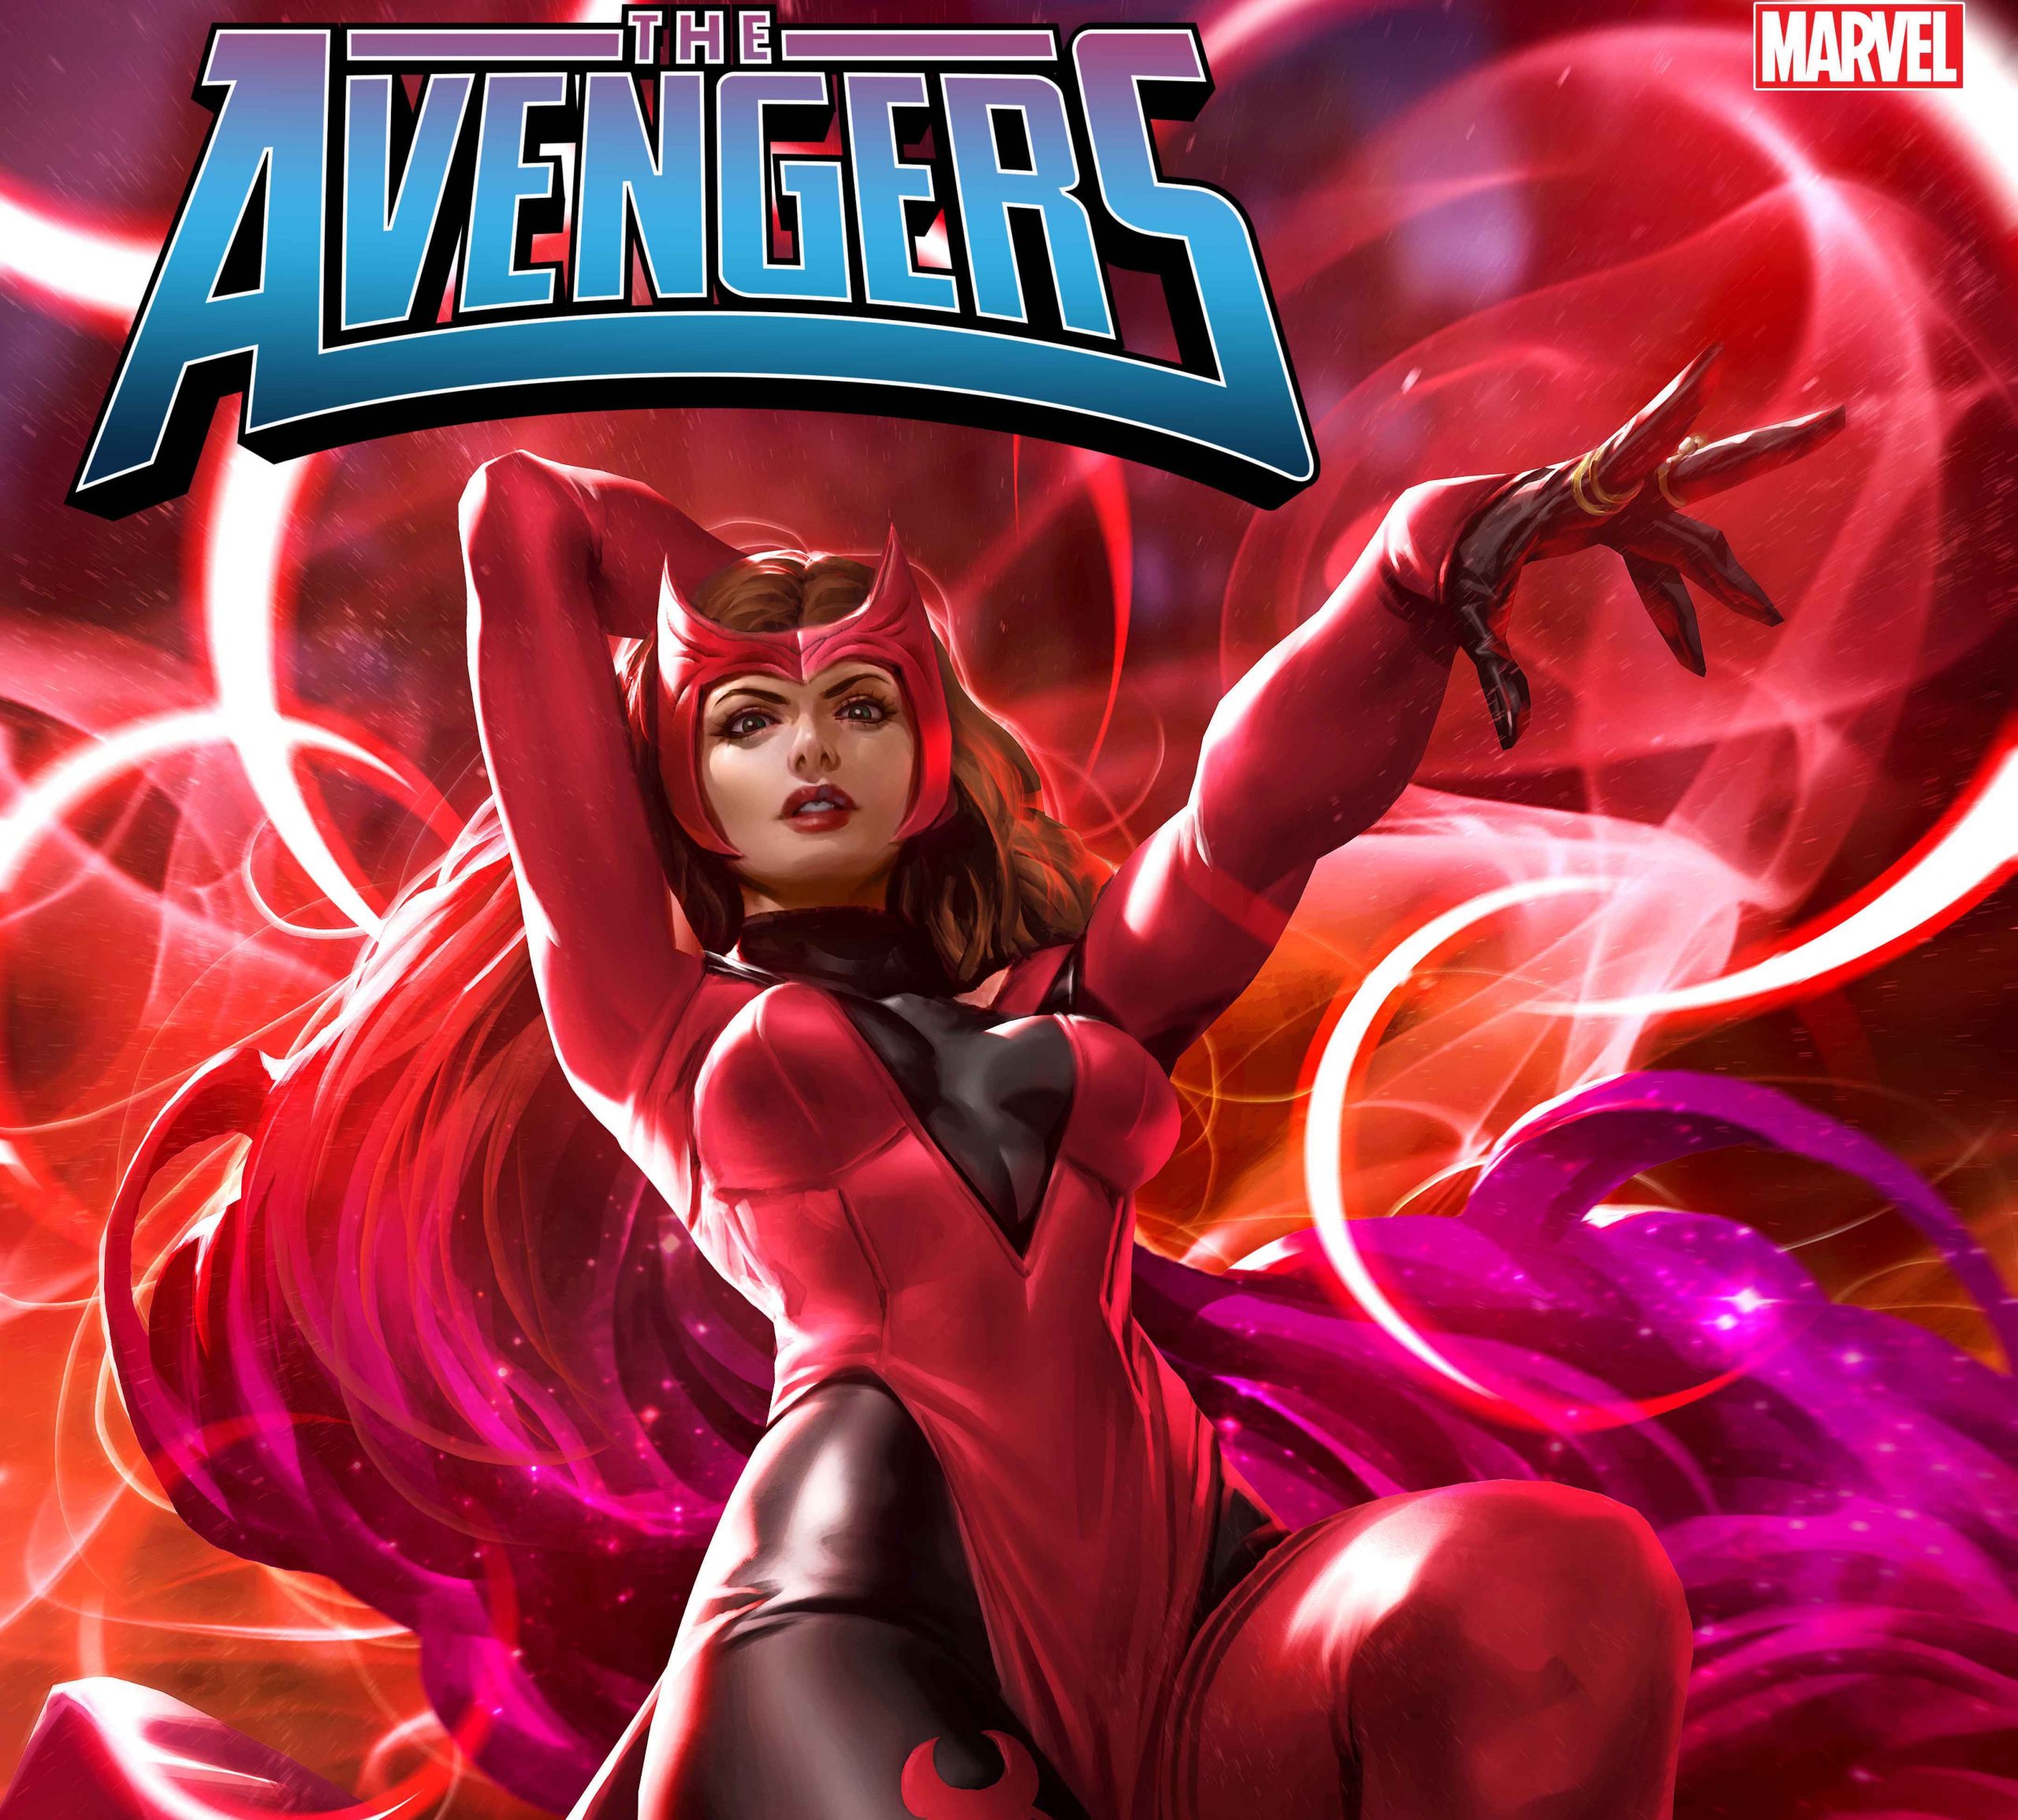 'Avengers' #1 scores Scarlet Witch variant cover by Derrick Chew